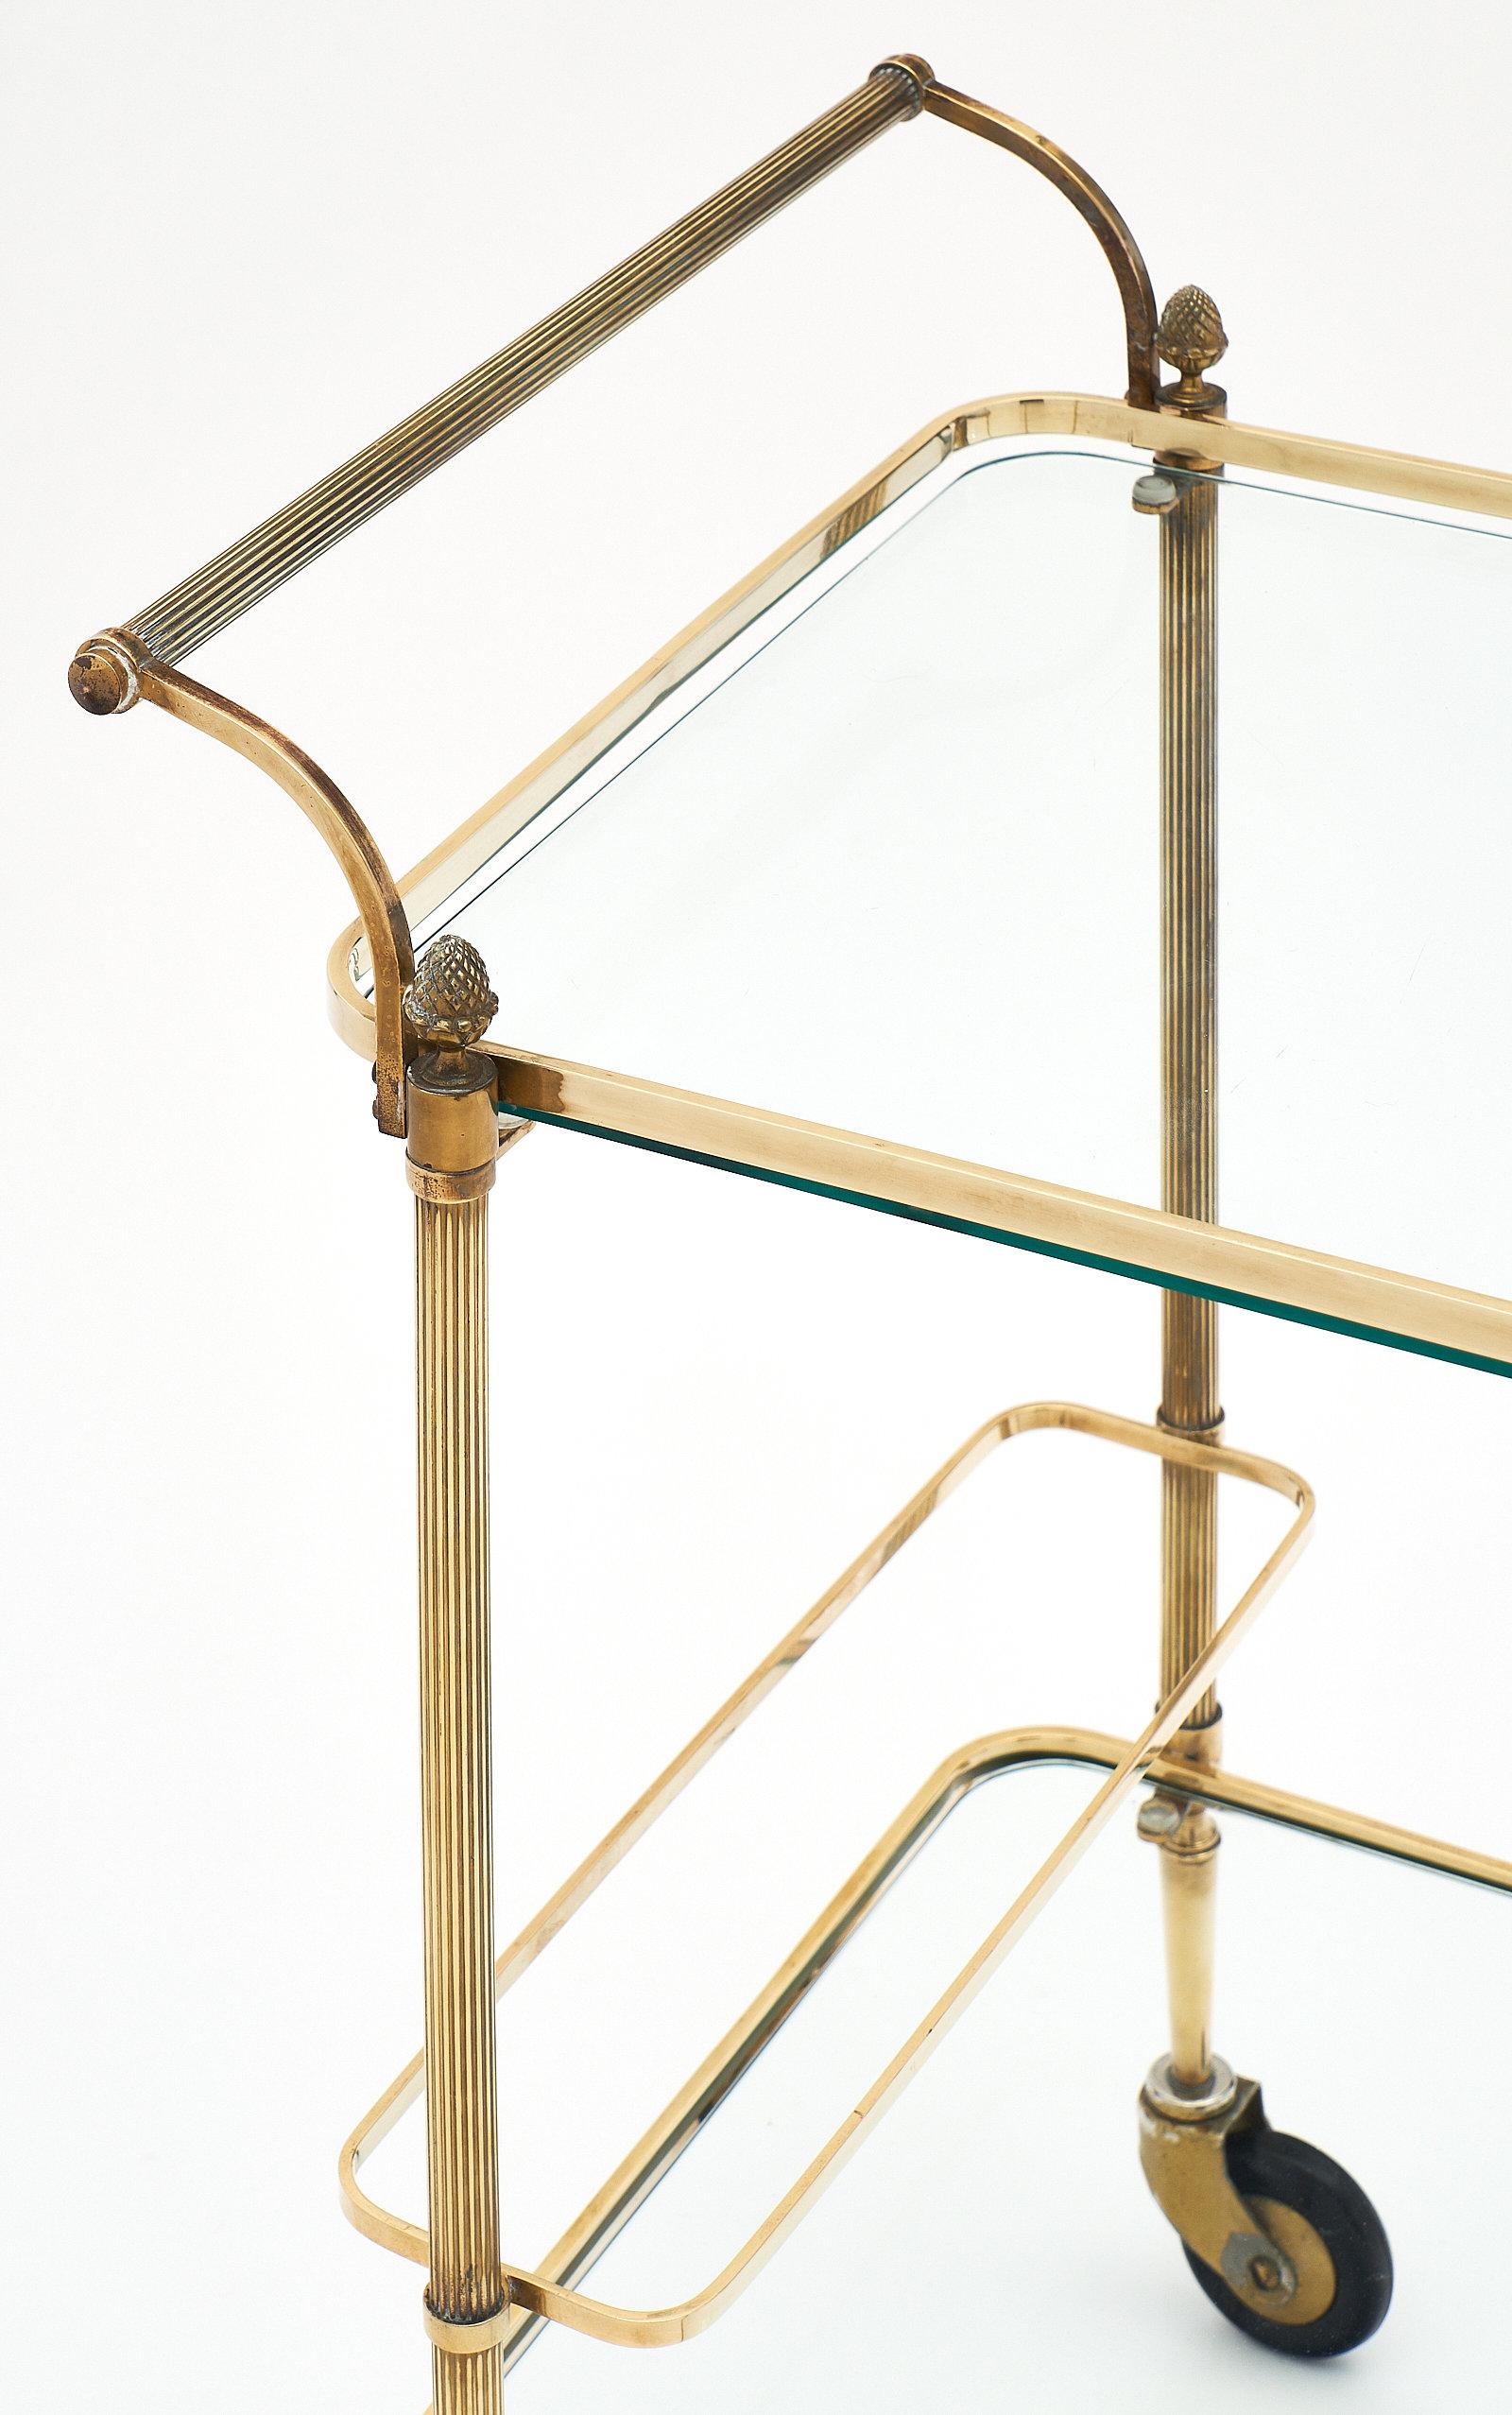 French Art Deco period bar cart with finials. This elegant, simple, and very sturdy piece features two shelves, a handle, decorative finials, and a bottle holder. This is a charming French bar cart we couldn’t resist. It is made of brass with glass